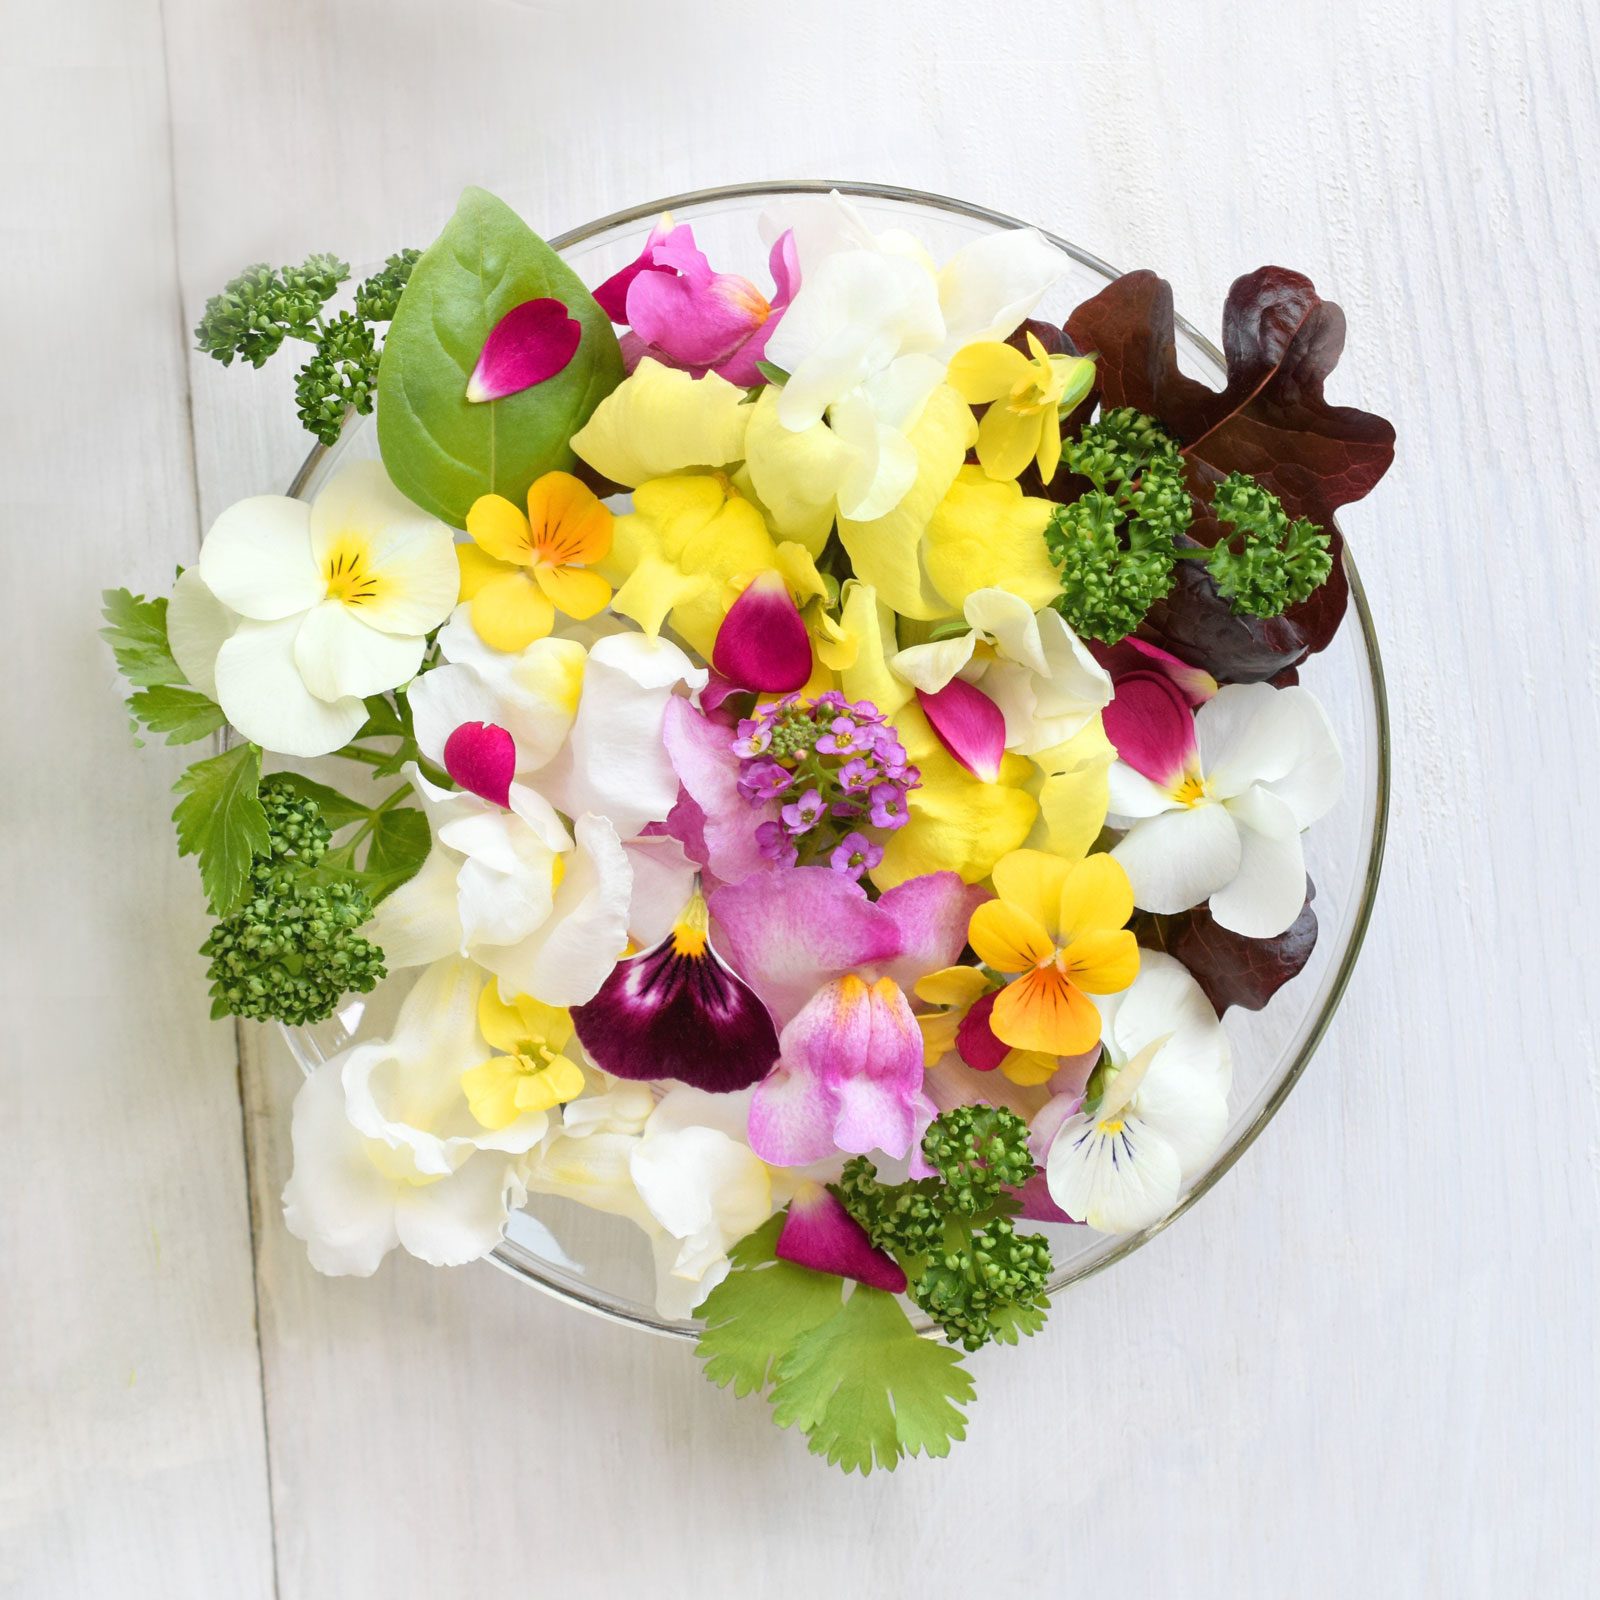 12 Edible Flowers That Are Our New Favourite Garnish for Every thing